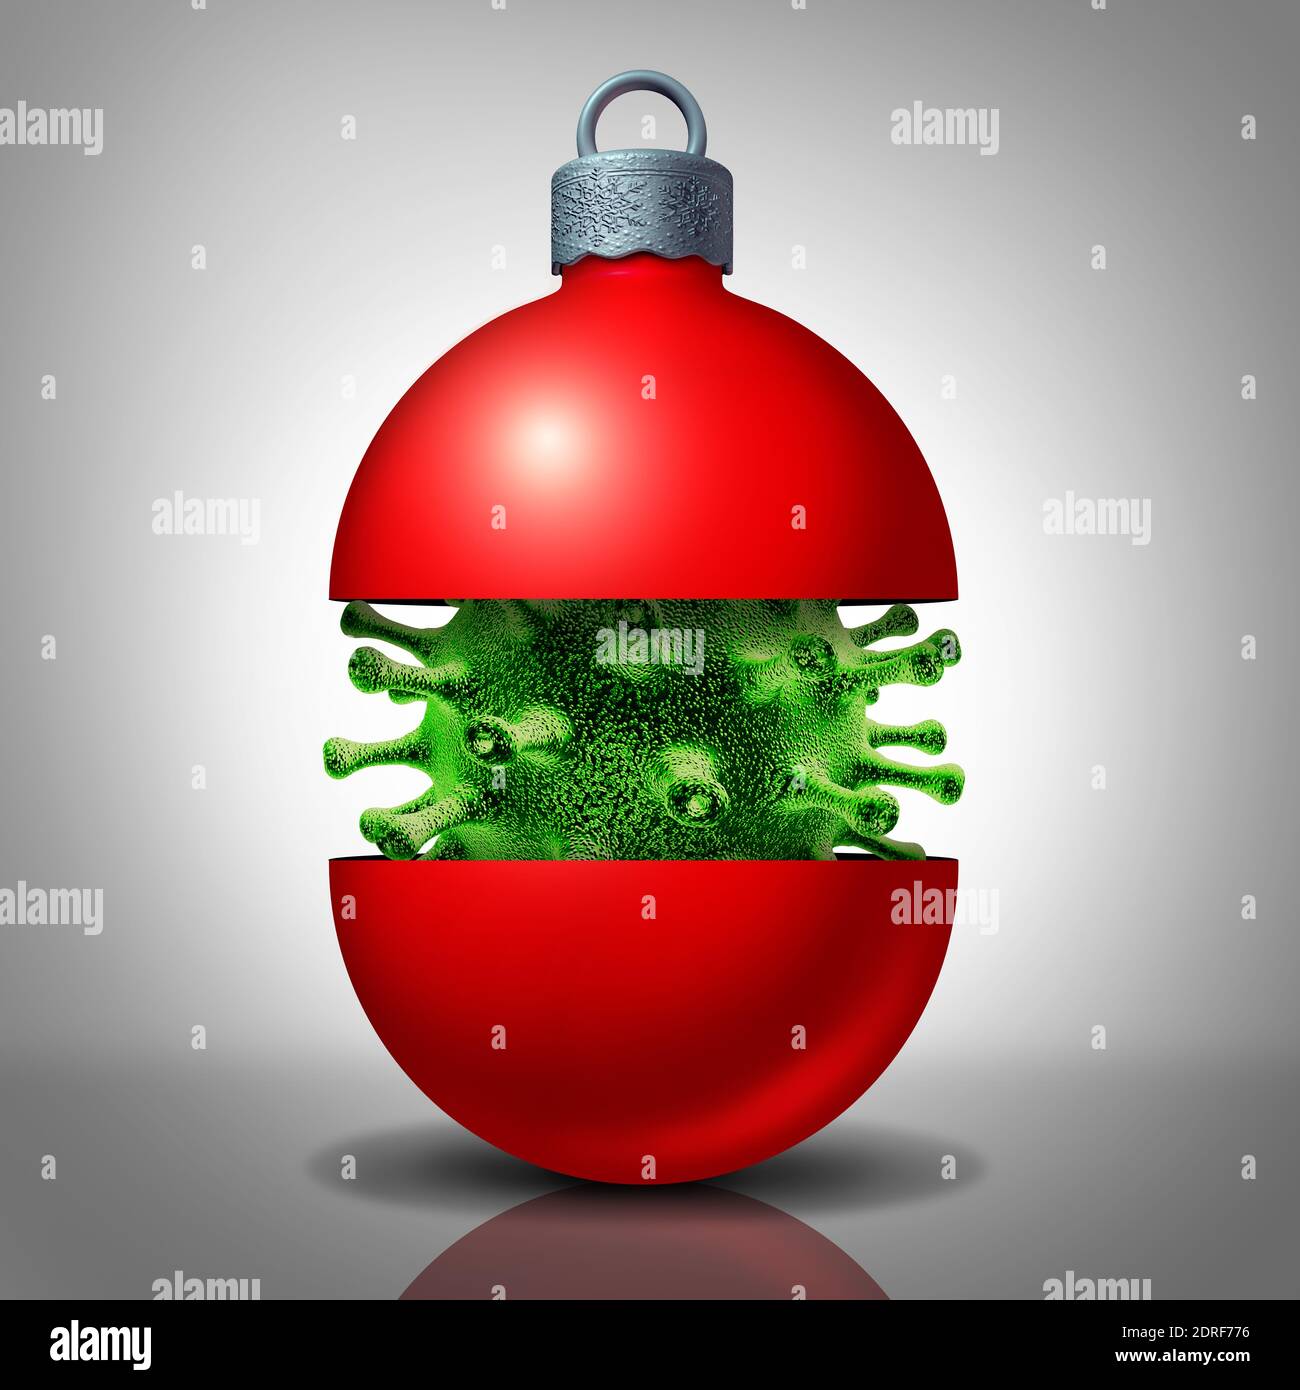 Christmas season virus and holiday flu or seasonal winter infection disease concept as a tree ornament shaped as a contagious cell during a pandemic. Stock Photo